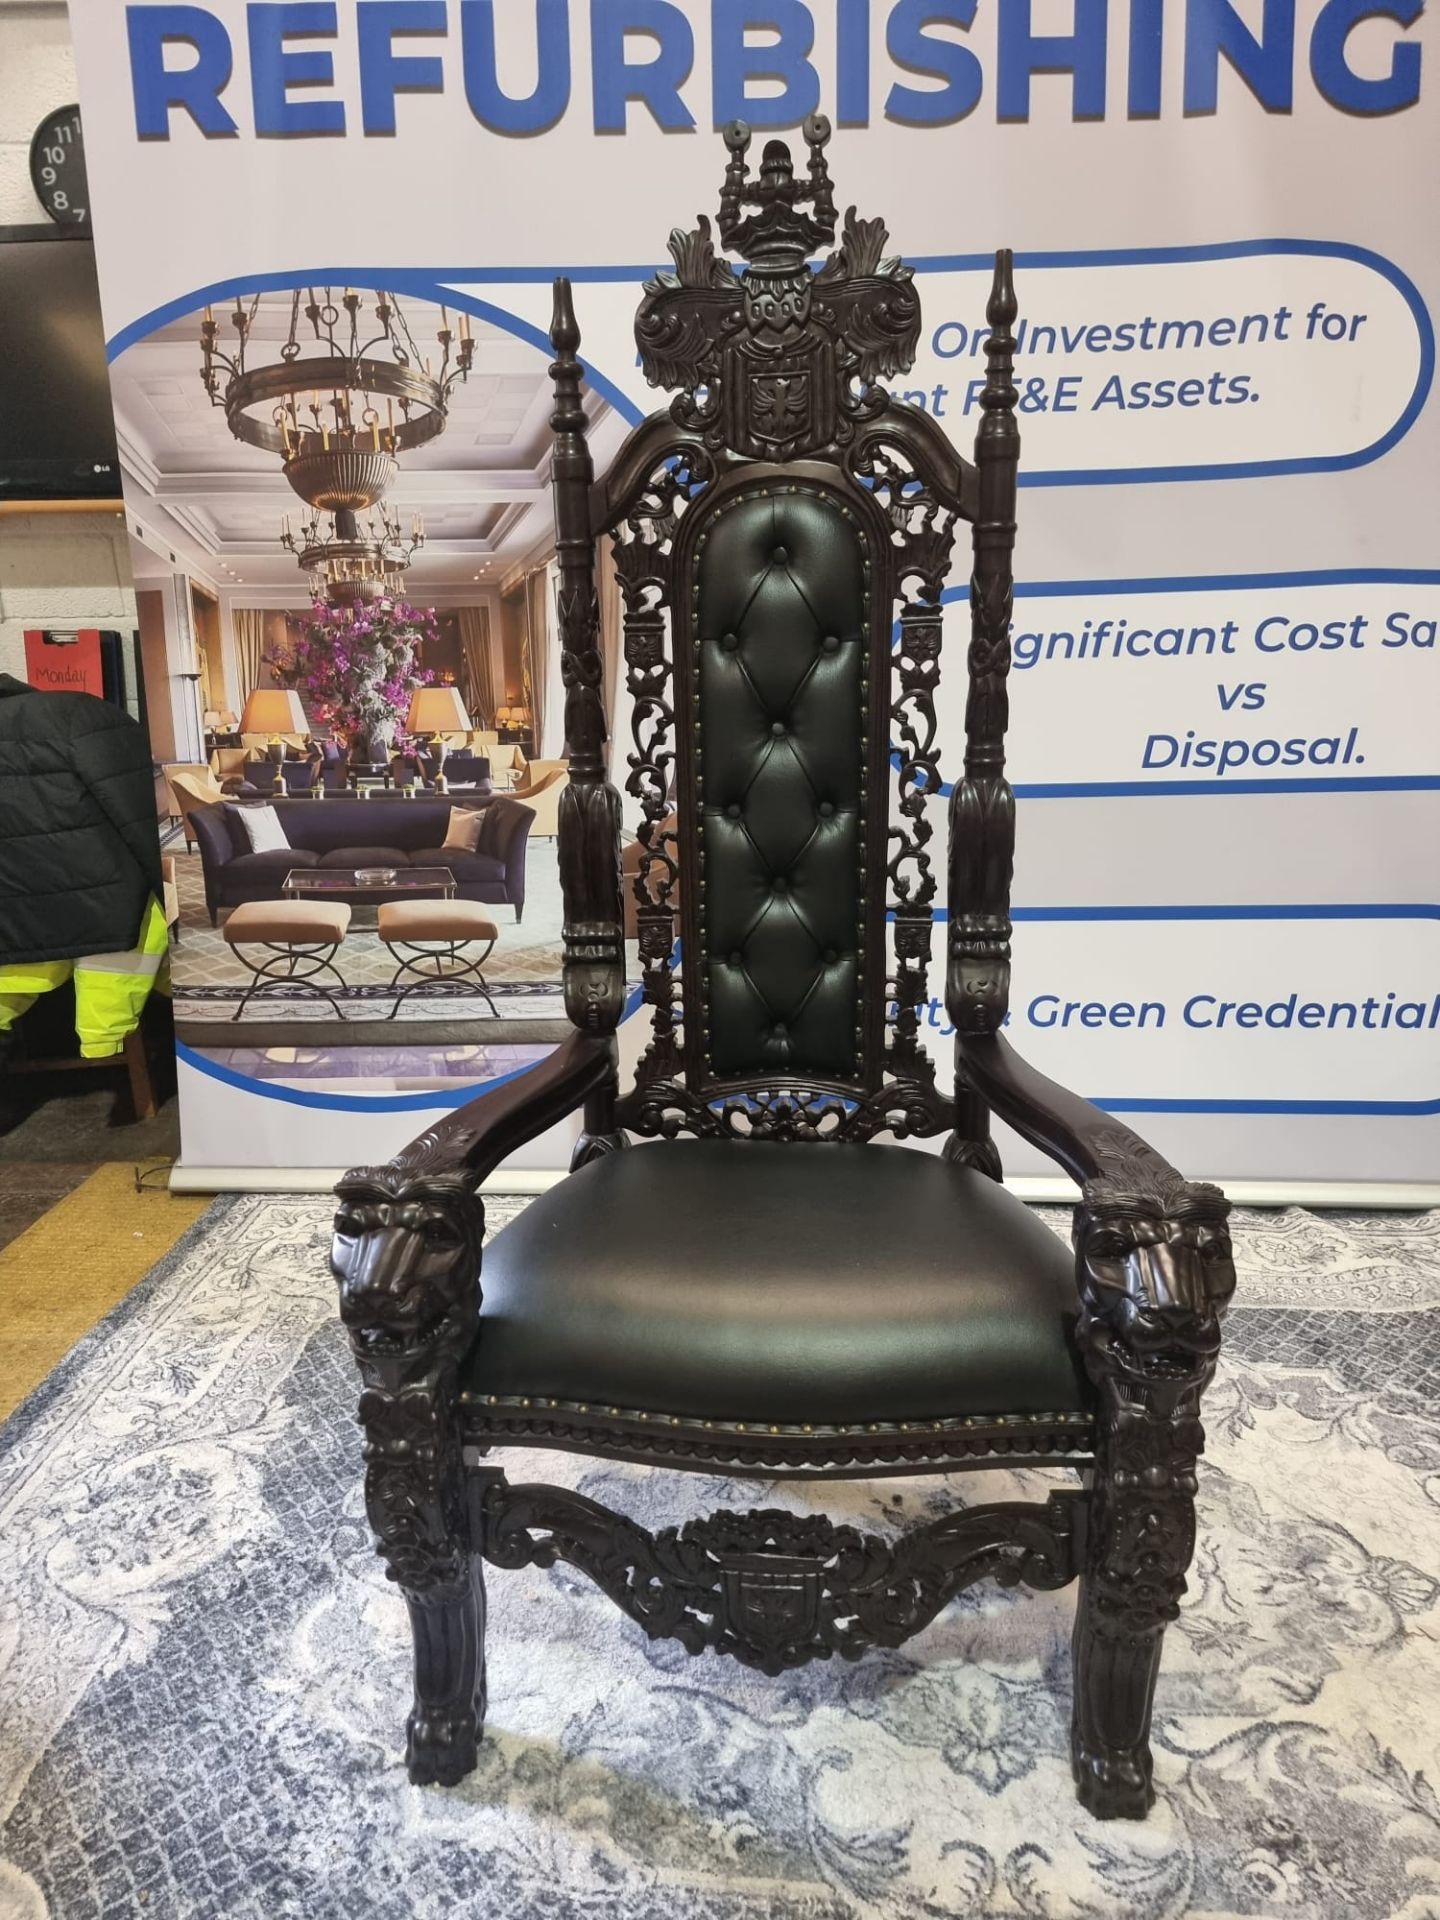 Handmade mahogany chair upholstered in a pinned black exceptional detailed carving. This antique